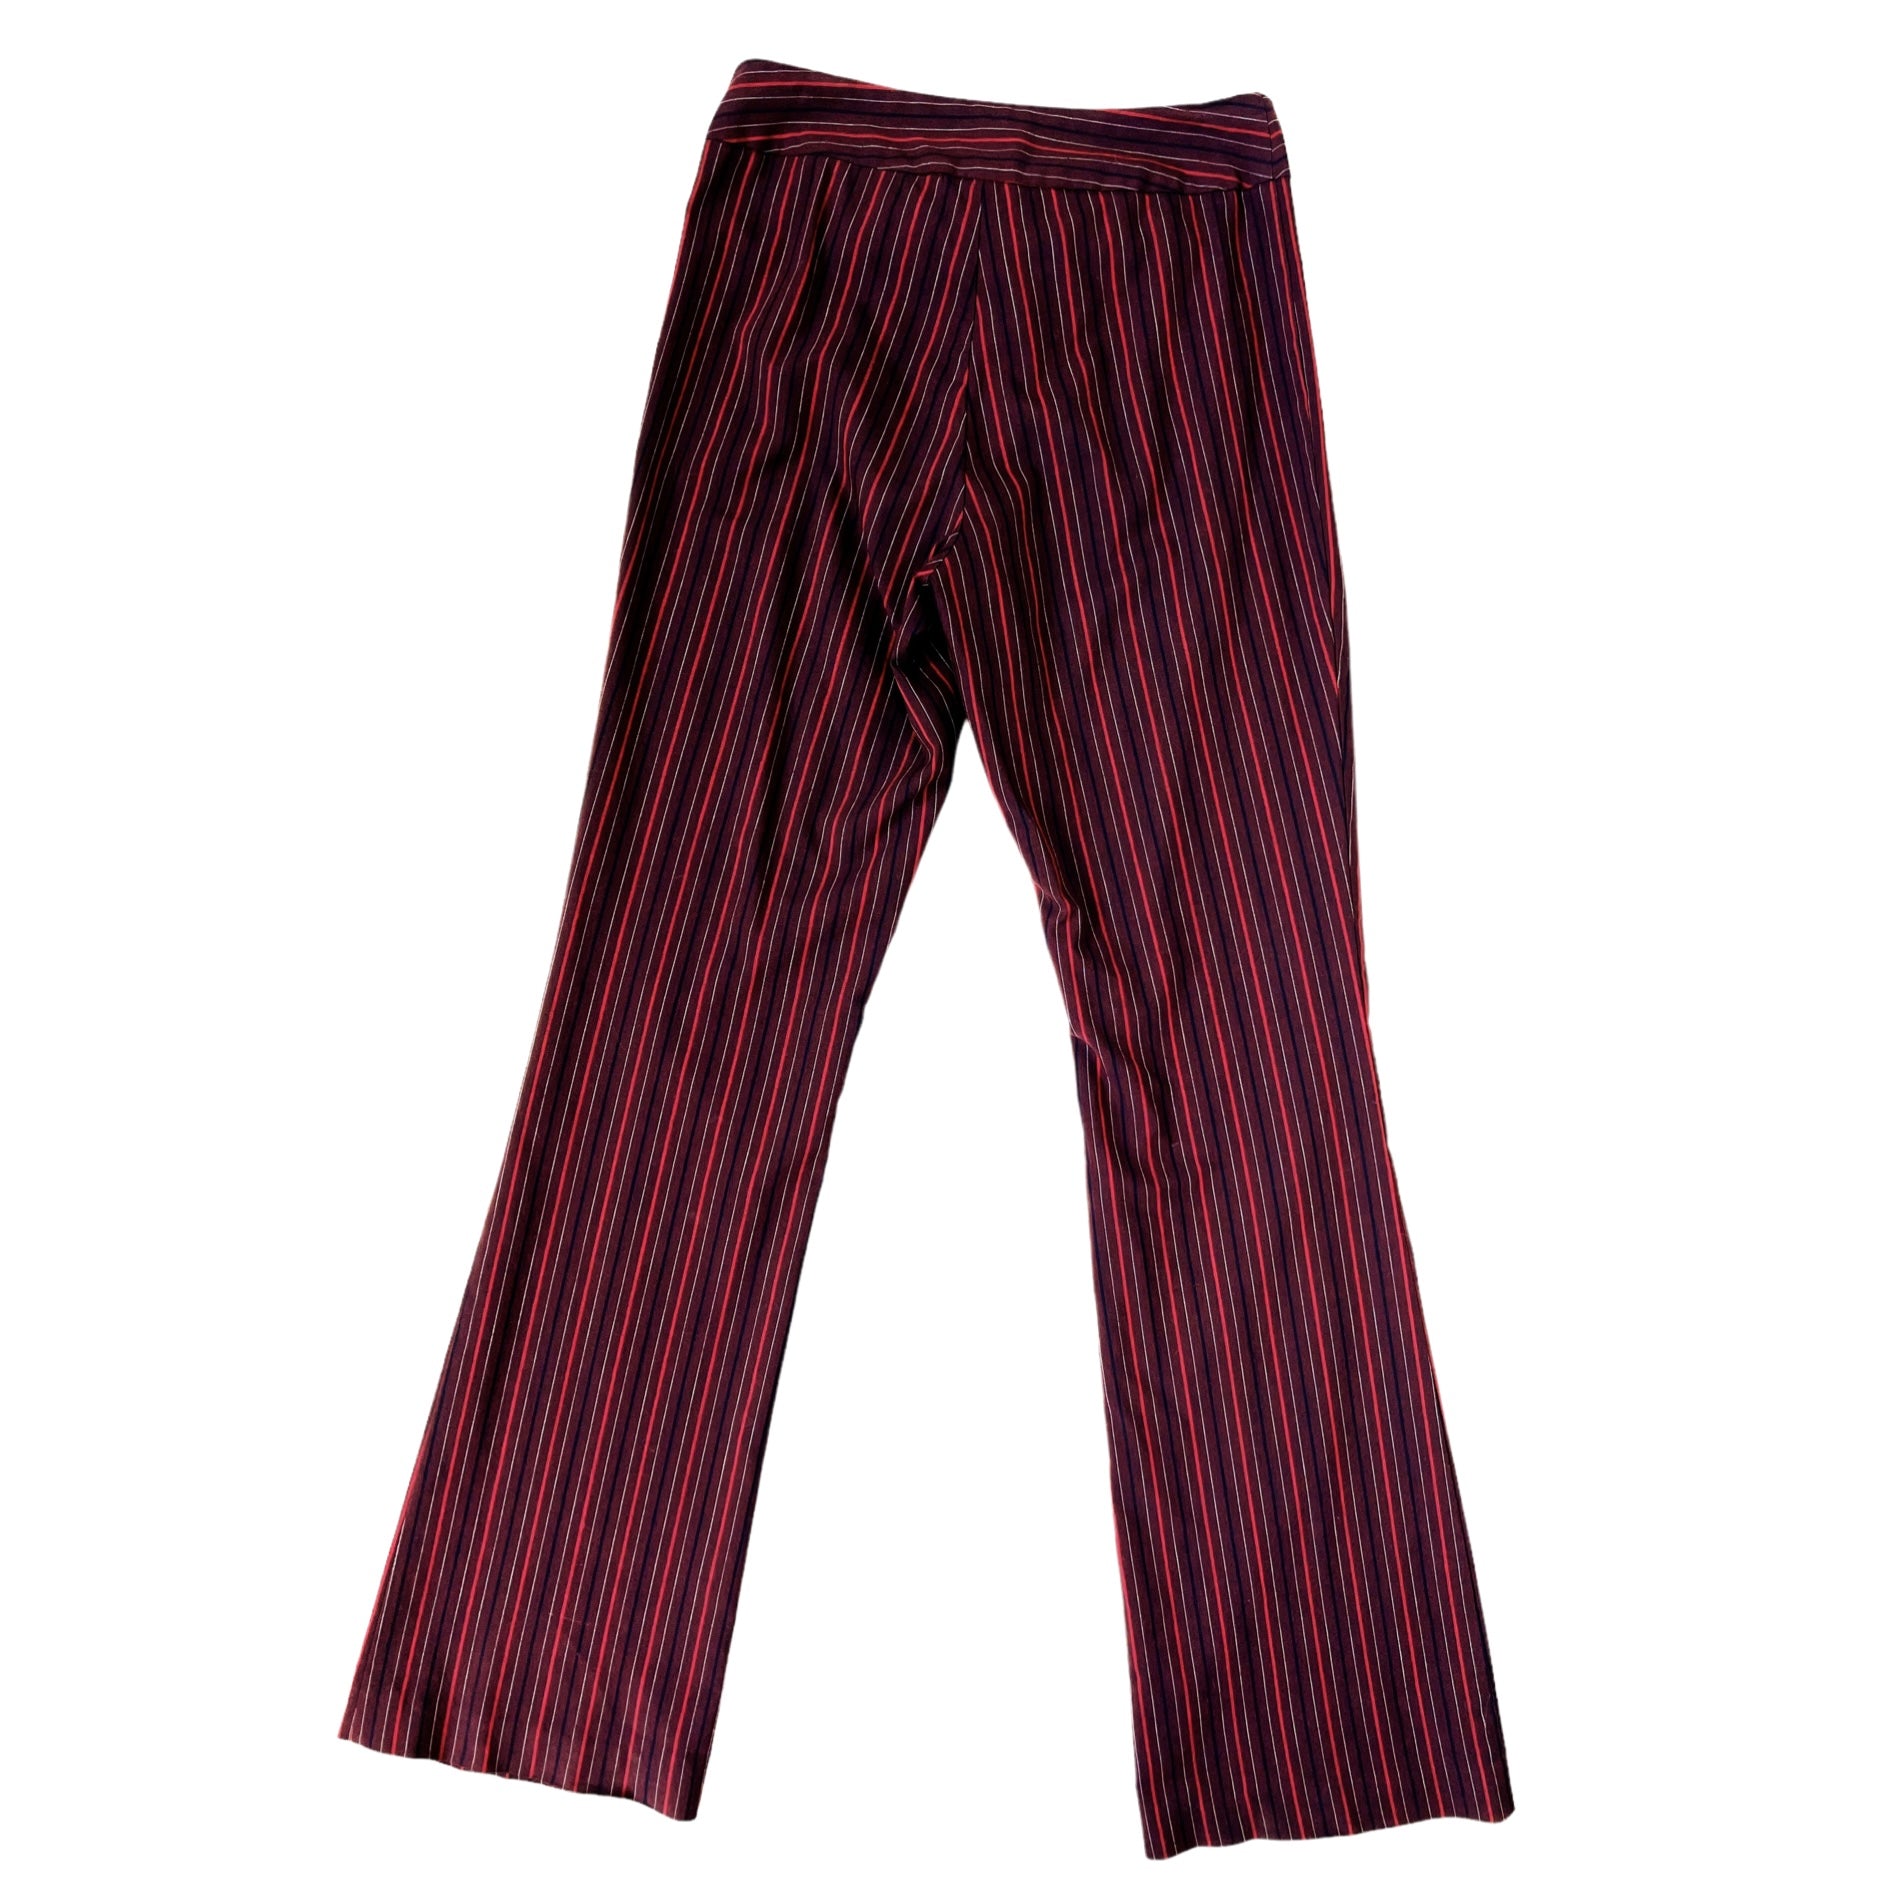 Vintage Caché Belted Pinstriped Pants (S)